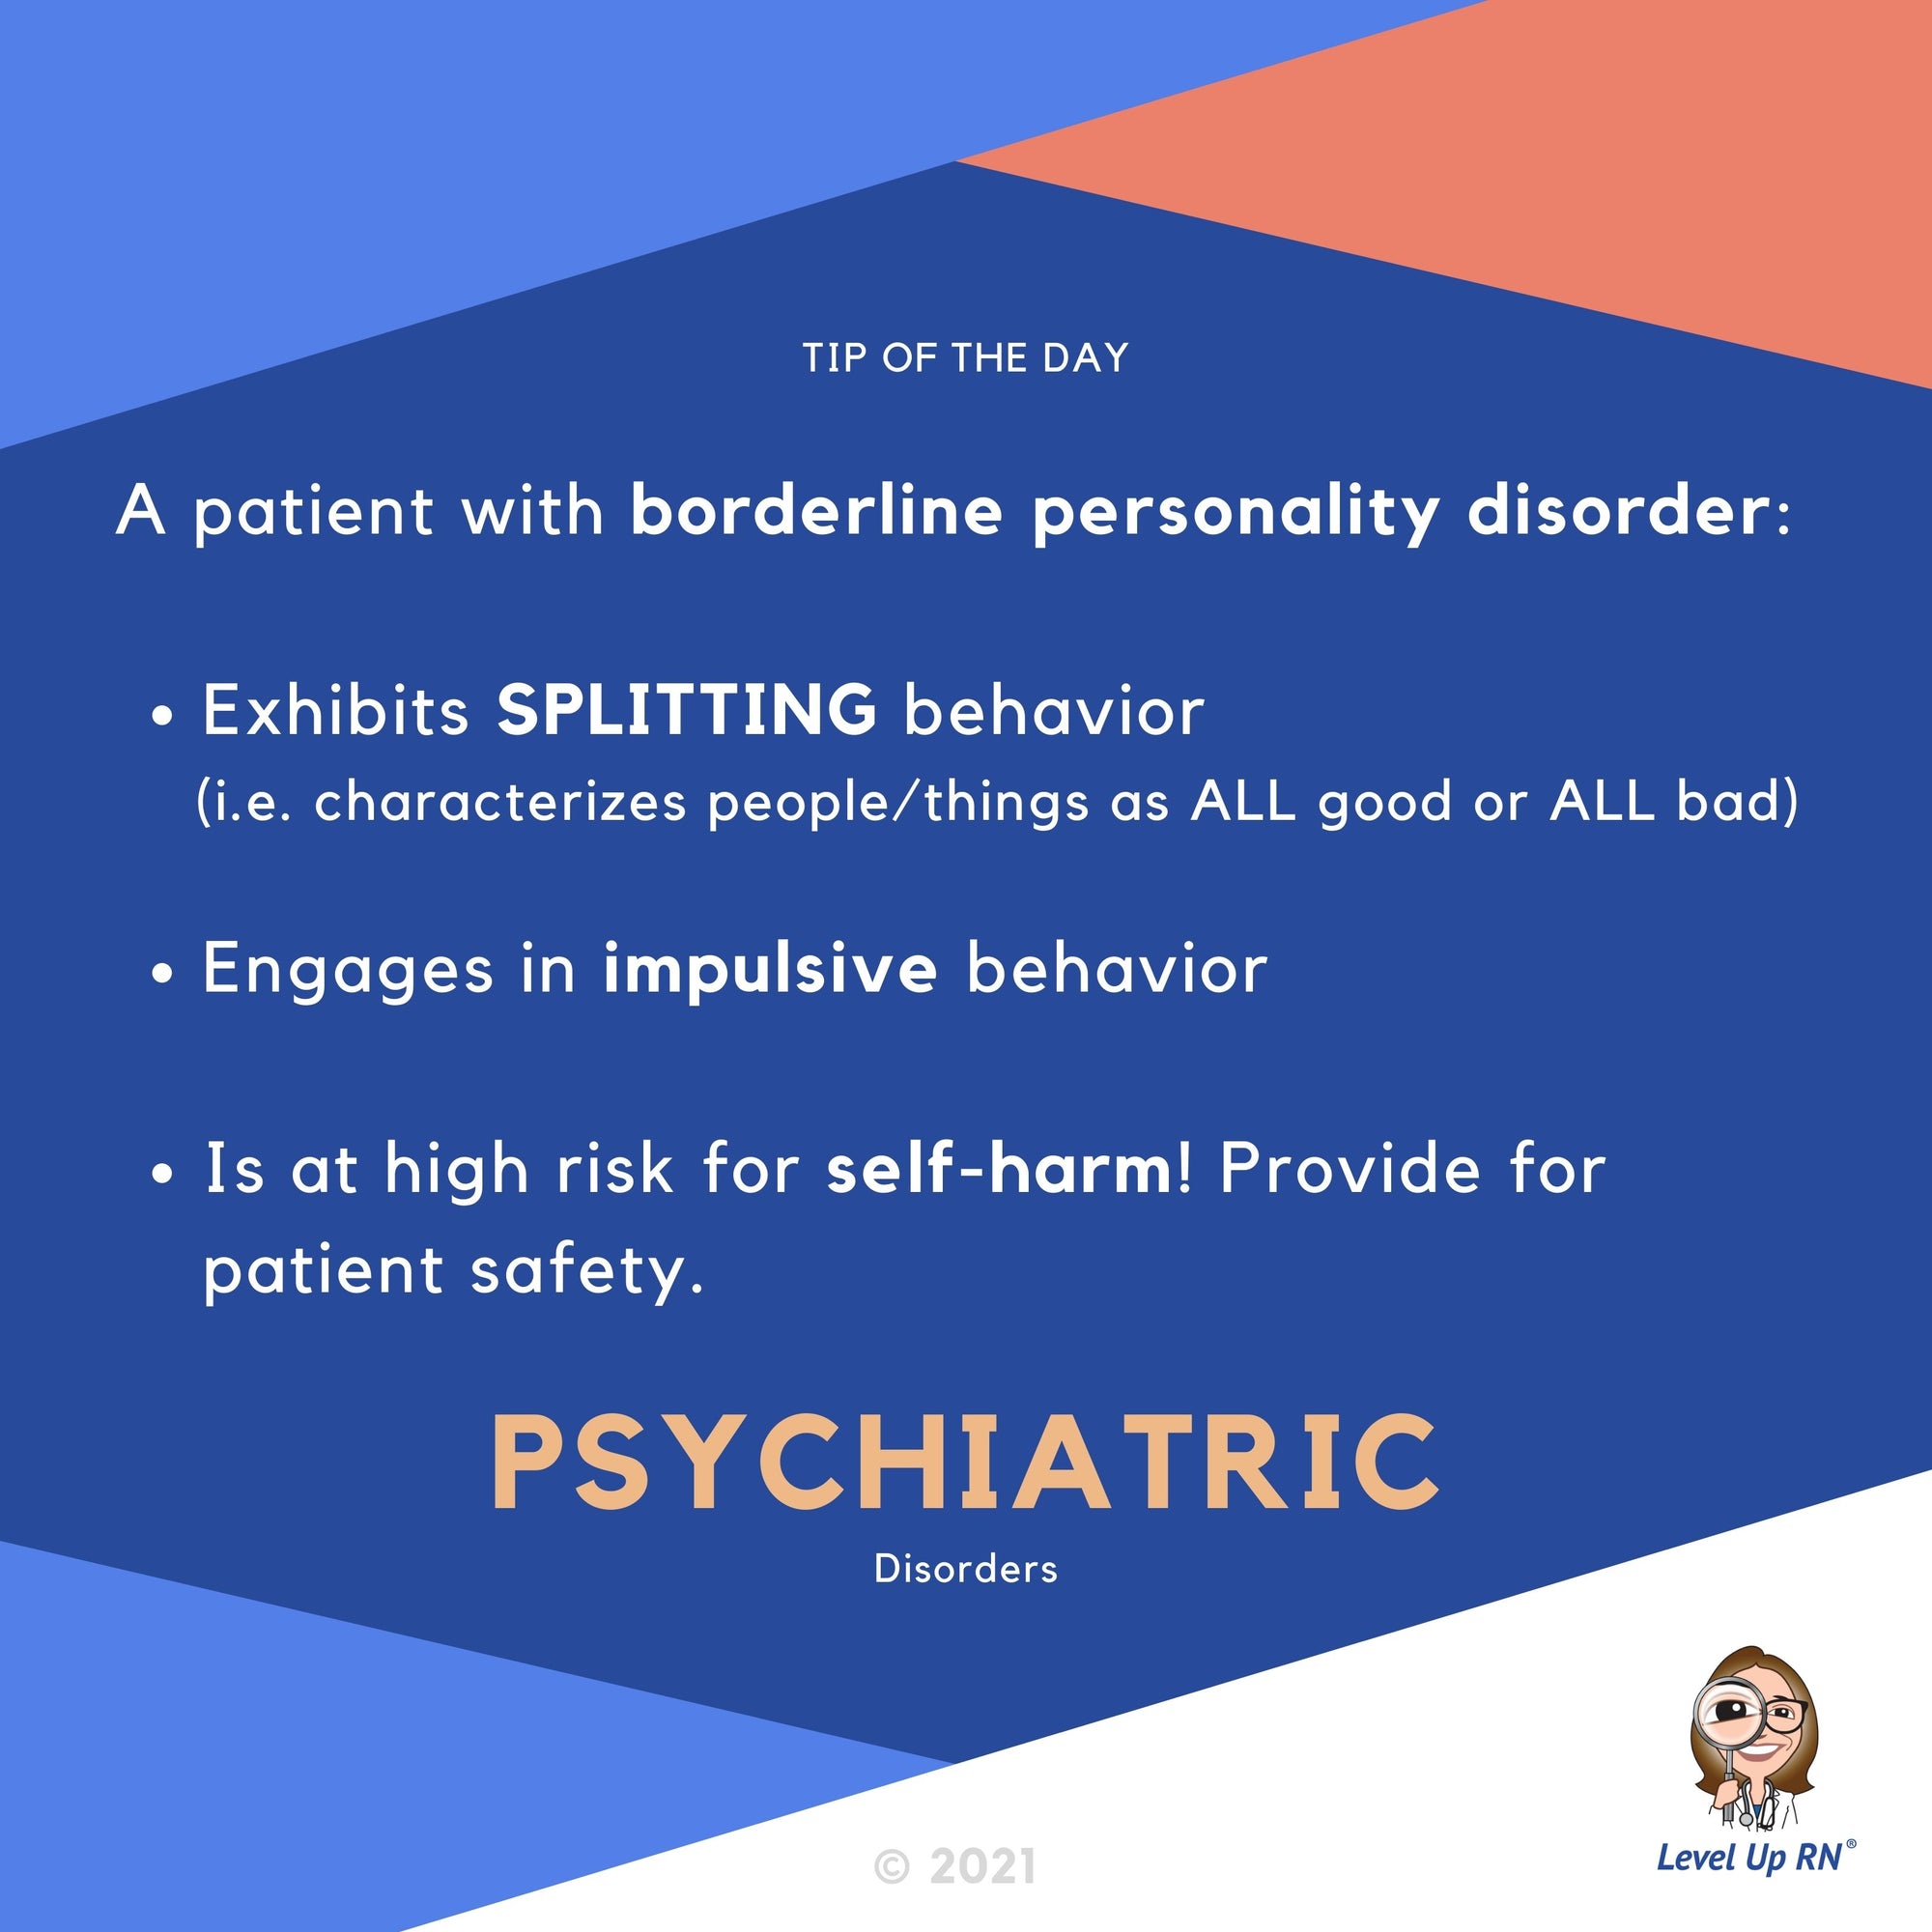 A patient with borderline personality disorder: Exhibits SPLITTING behavior (i.e. characterizes people/things as ALL good or ALL bad). Engages in impulsive behavior. Is at high risk for self-harm! Provide for patient safety.